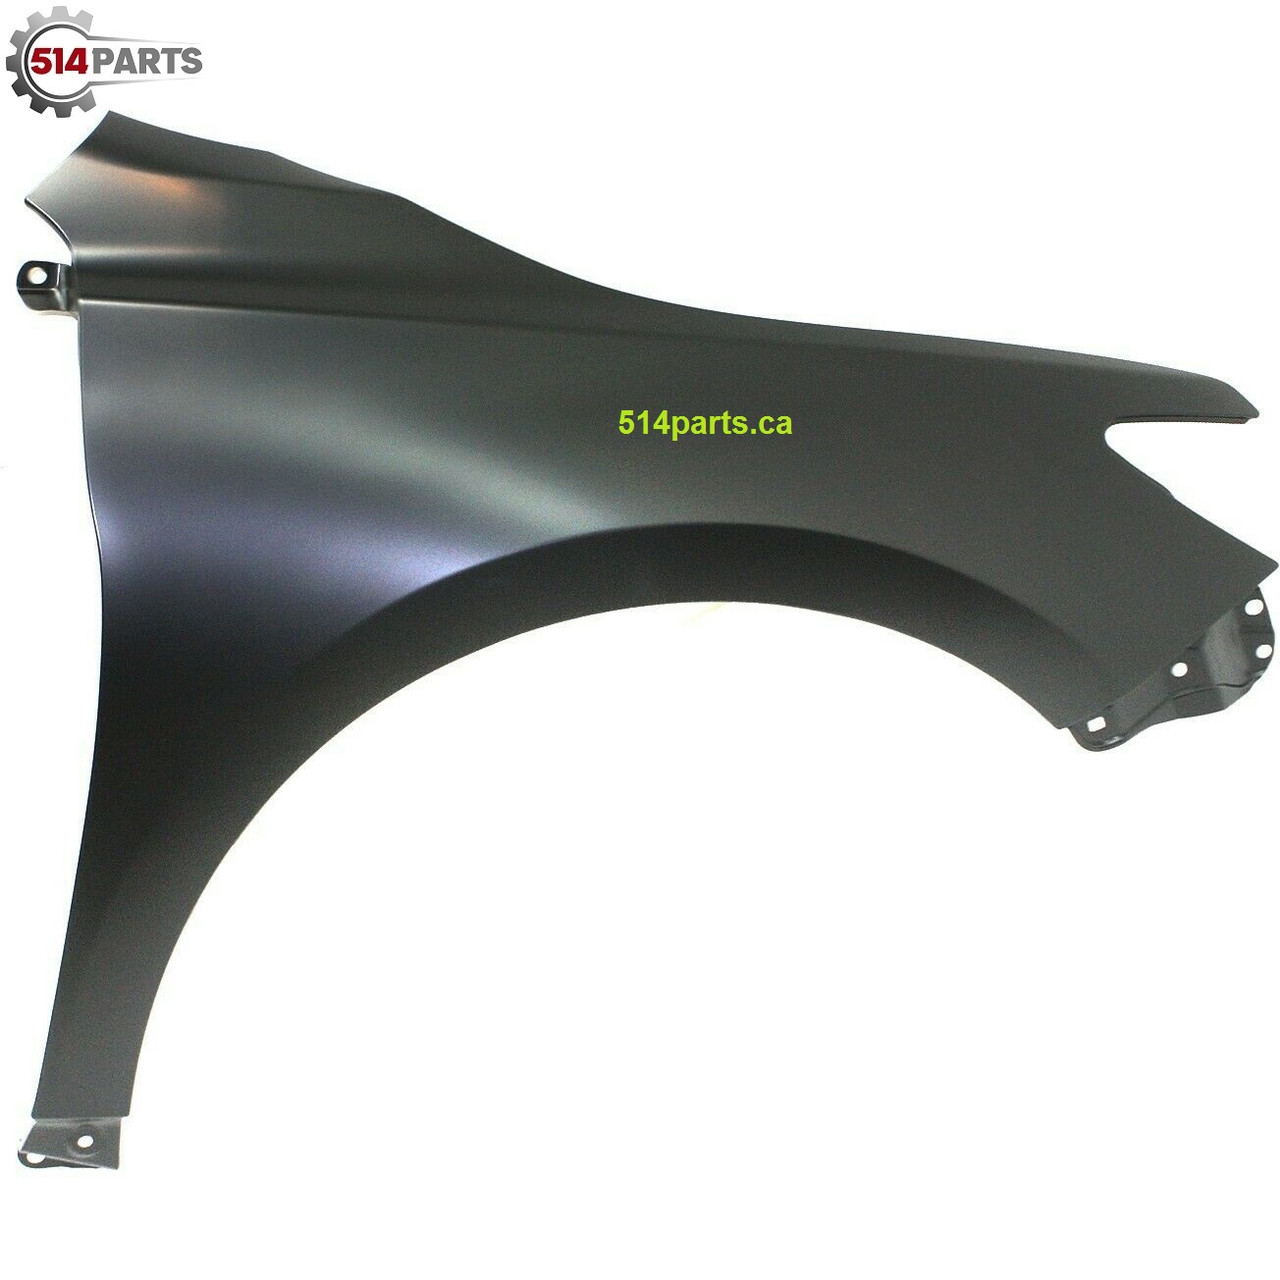 2015 - 2017 TOYOTA CAMRY and CAMRY HYBRID FENDERS - AILES